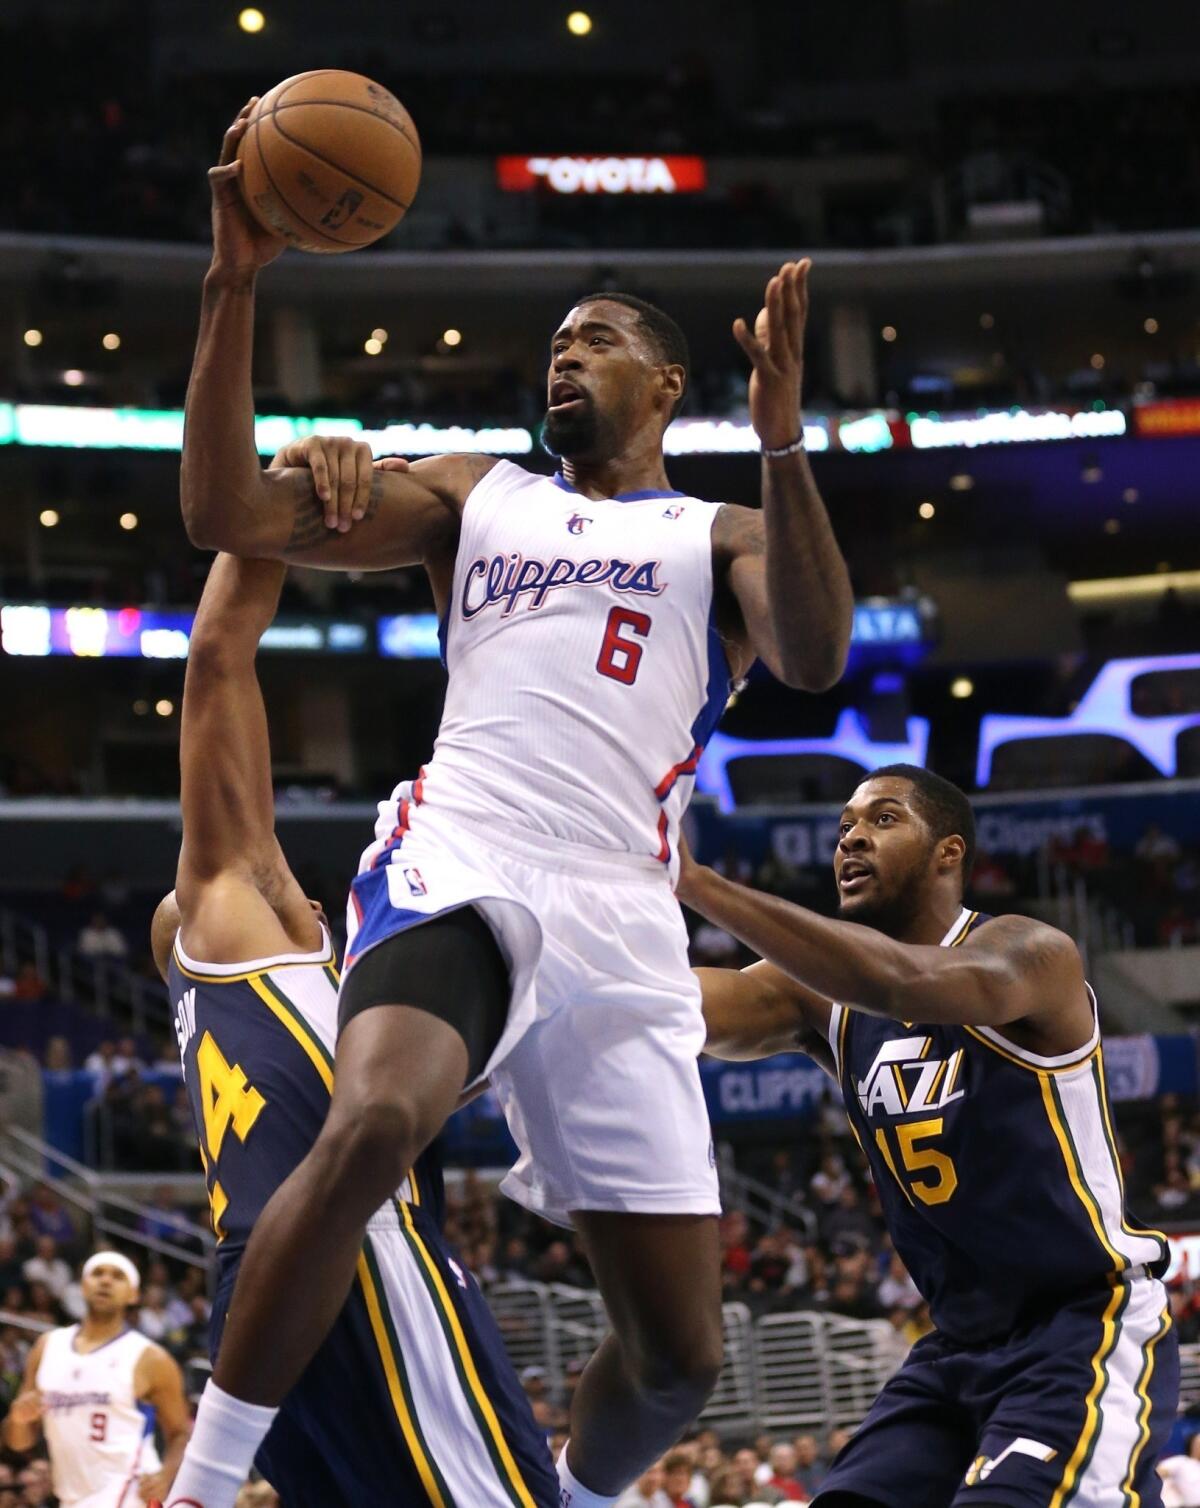 Clippers center DeAndre Jordan will have a difficult defensive assignment against Pau Gasol of the Lakers.